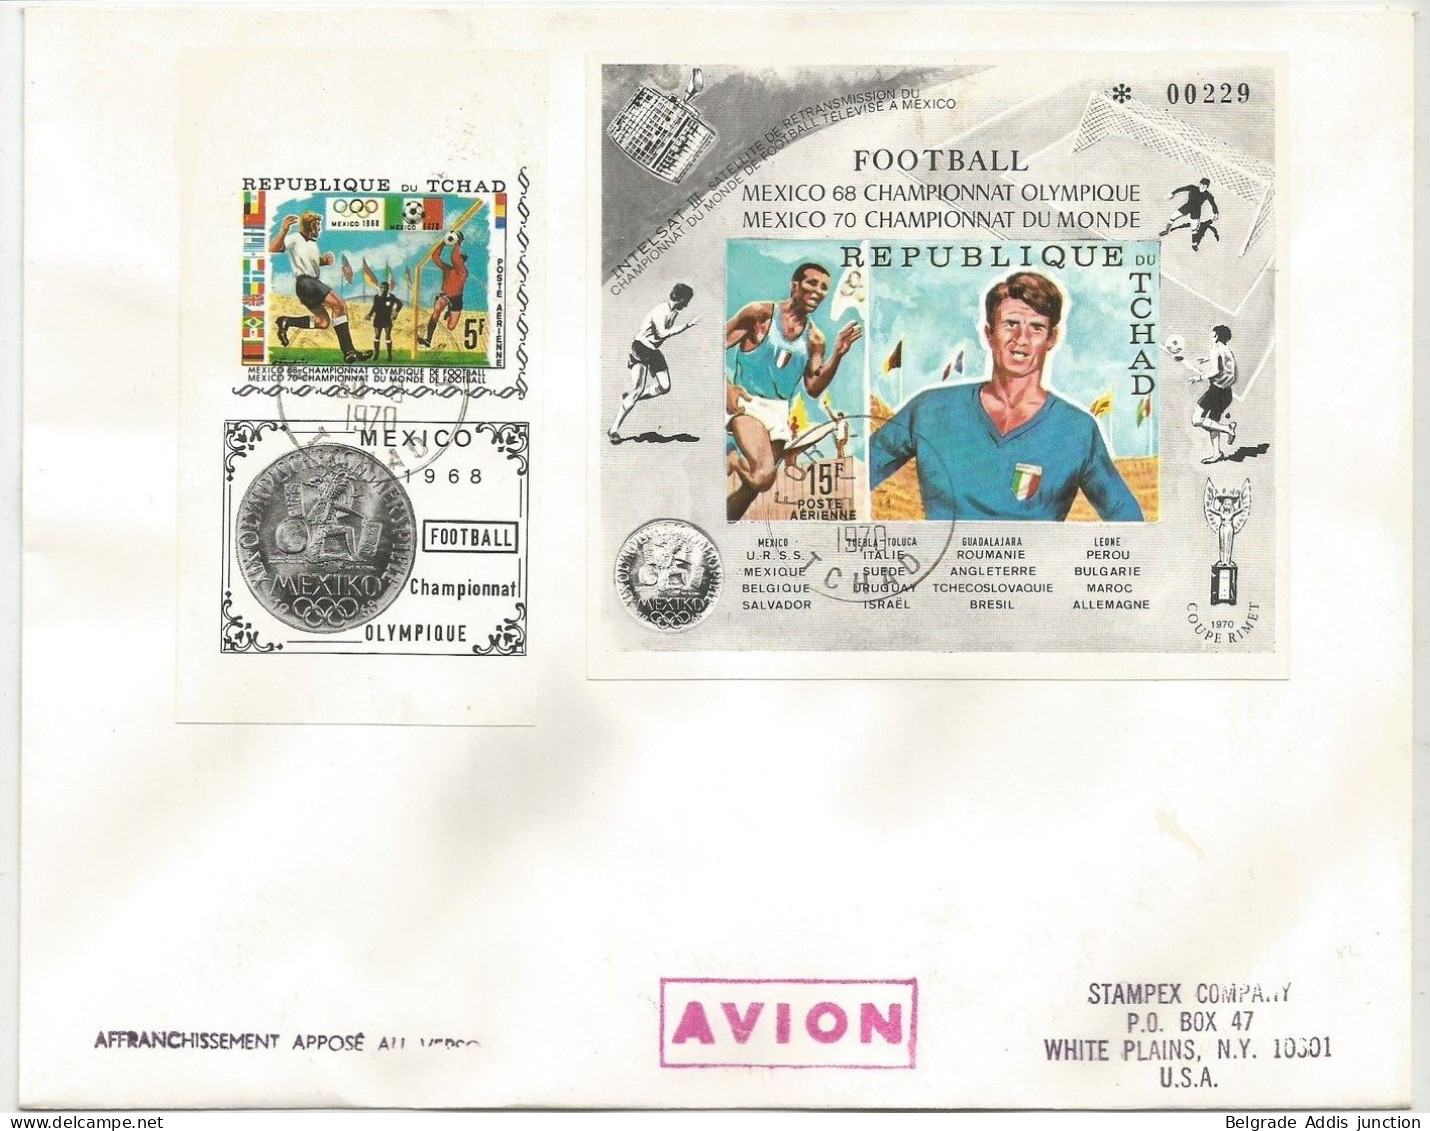 Tchad Tschad Chad Mi.307B + Bl.8B Stamp + Block IMPERFORATED Used On Cover To USA 1970 Olympic Football - 1970 – Mexico